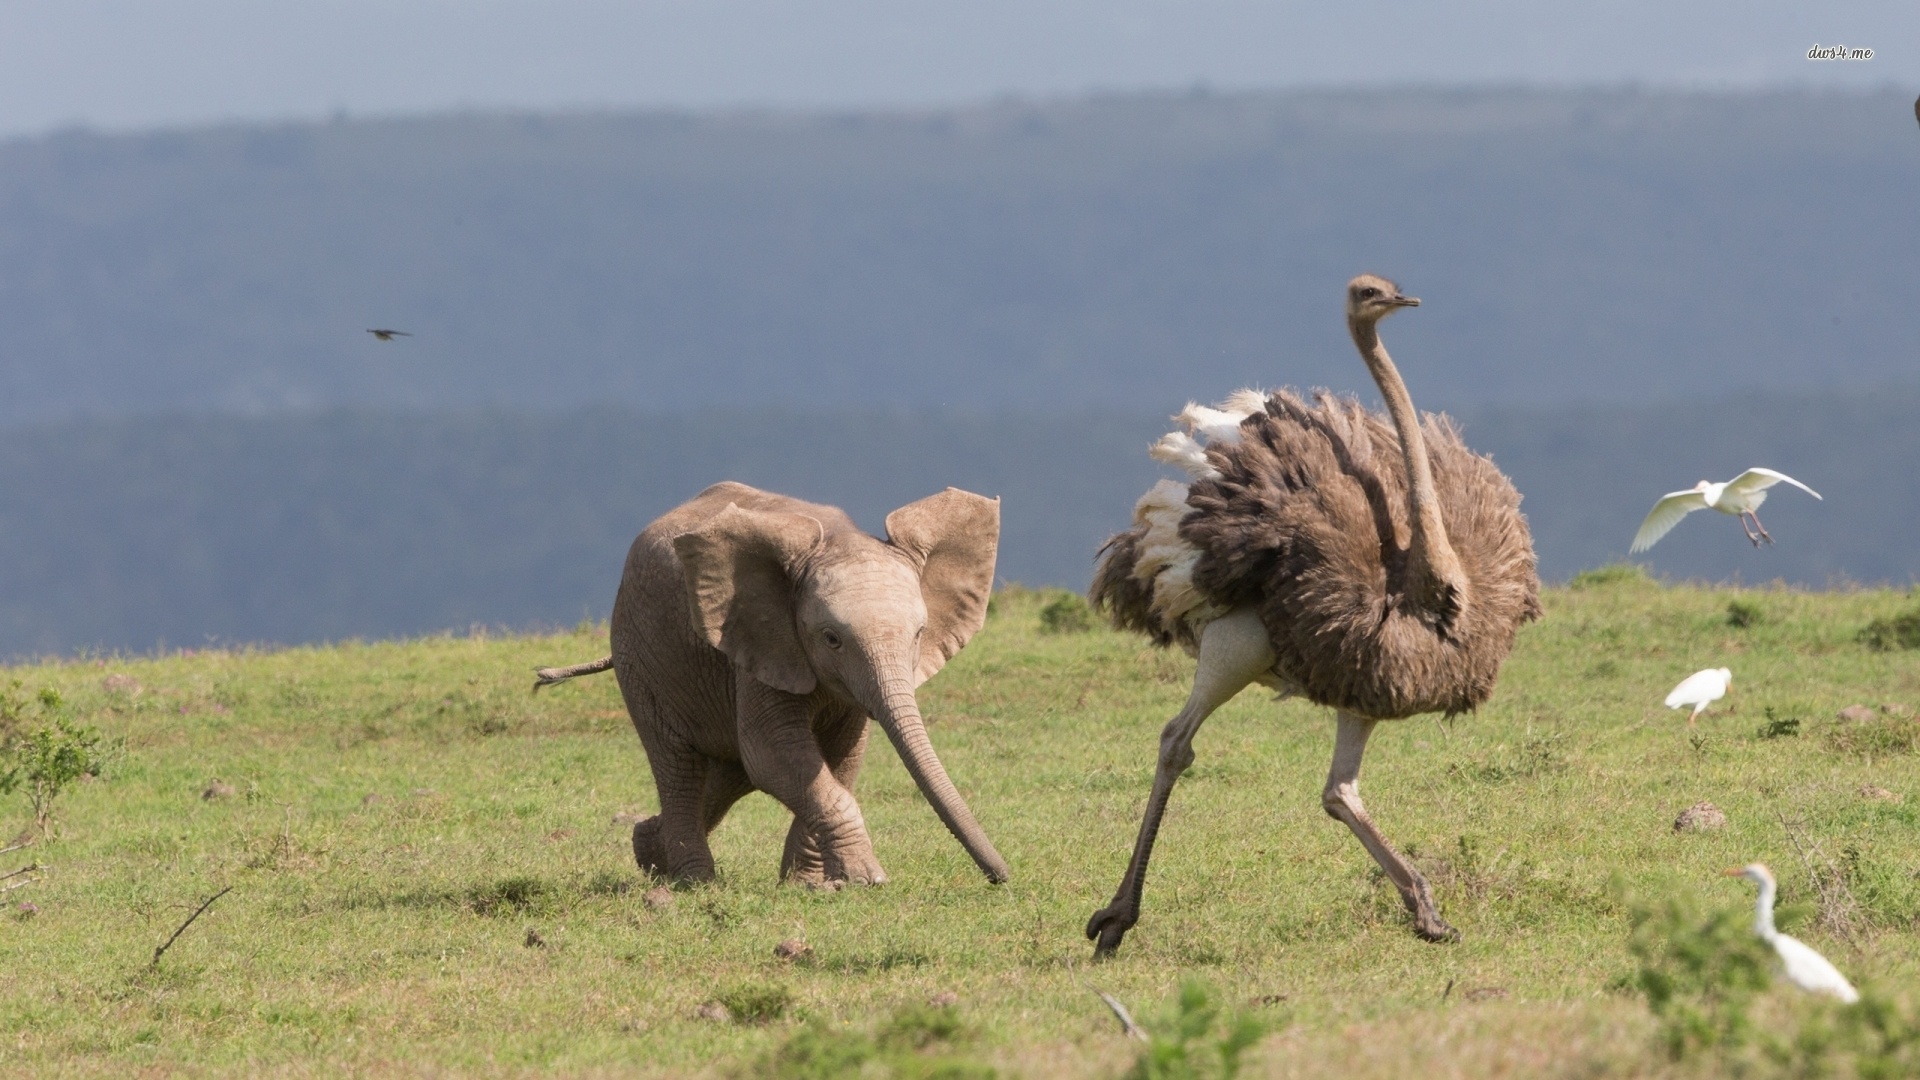 Ostrich wallpapers, Posted by Christopher Sellers, Animal hq ostriches, Feathered giants, 1920x1080 Full HD Desktop